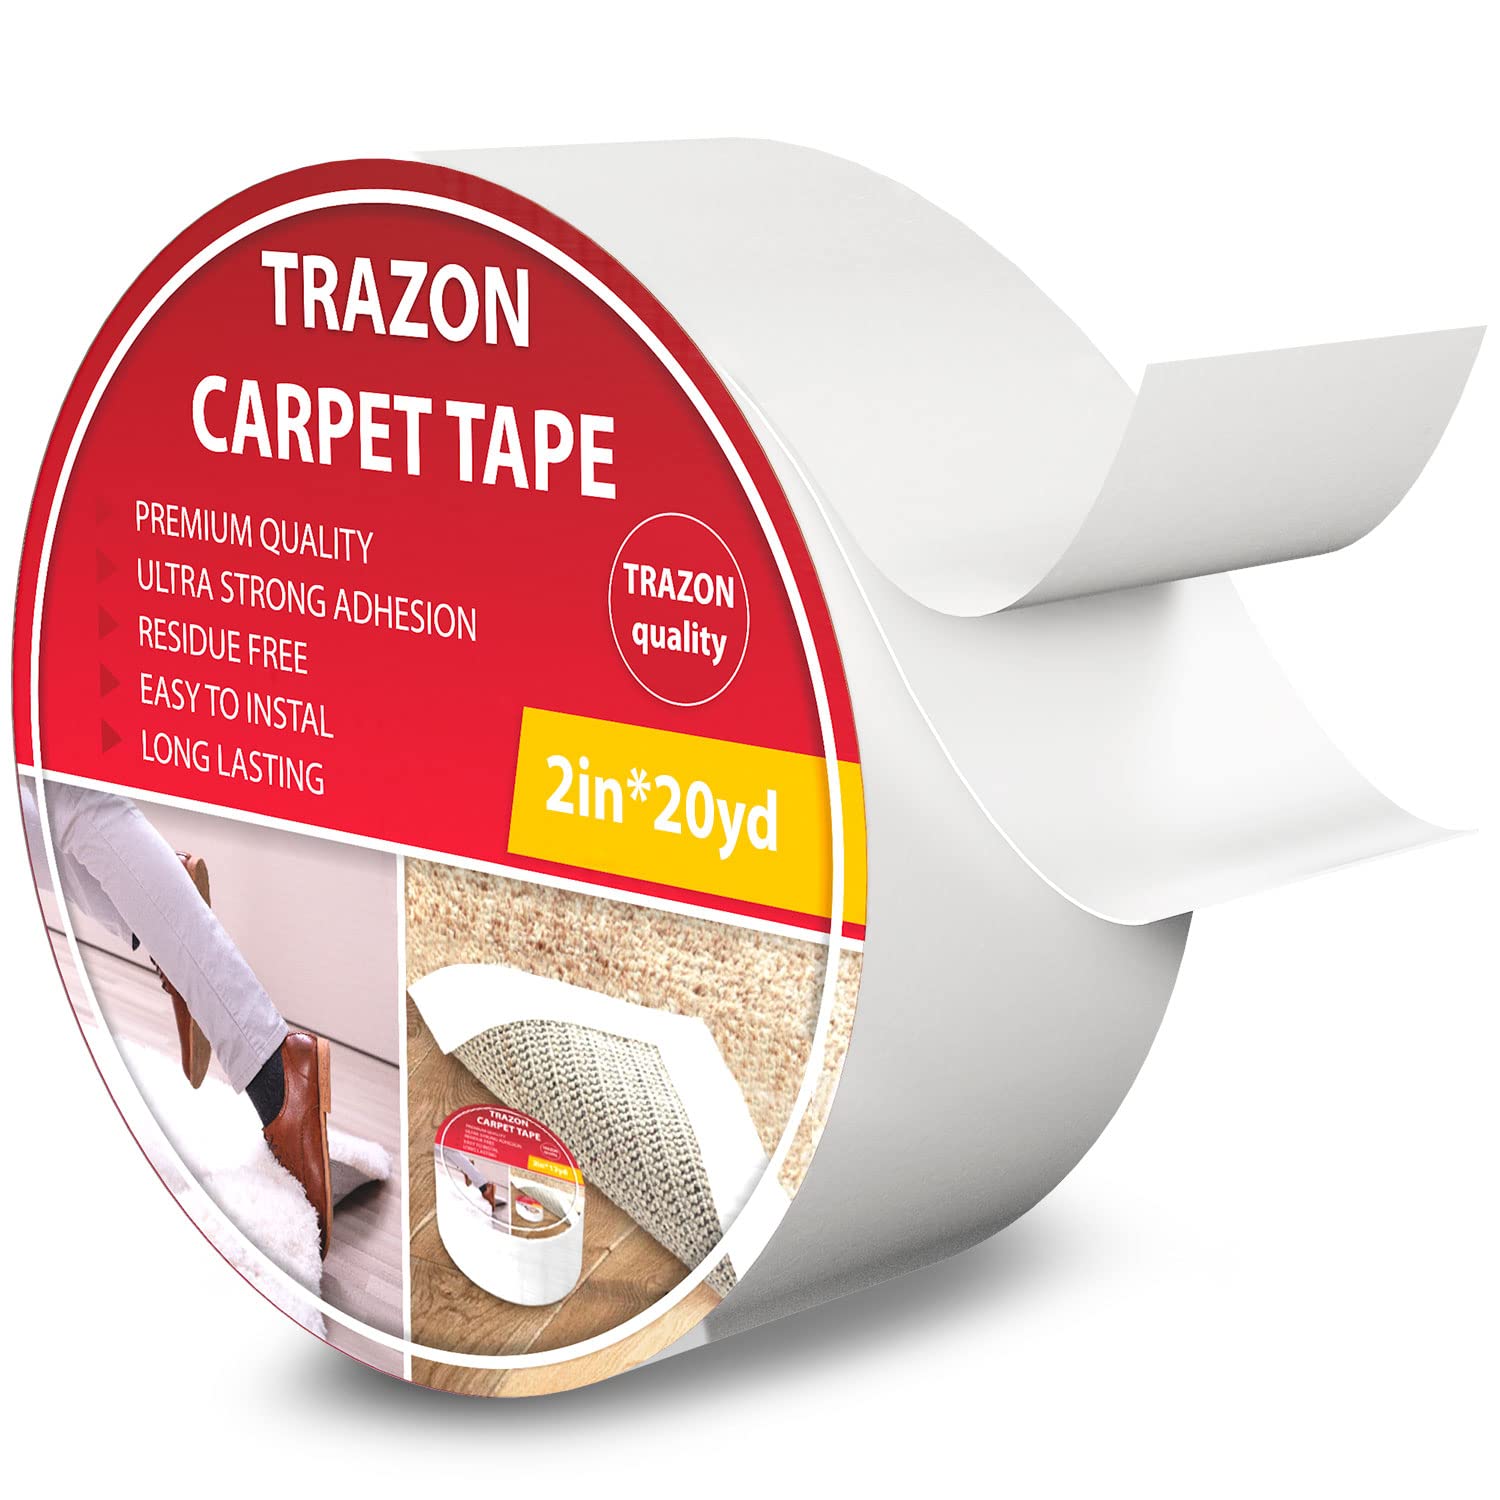  Carpet Tape Double Sided - Rug Tape Grippers for Hardwood Floors  and Area Rugs - Carpet Binding Tape Strong Adhesive and Removable, Heavy  Duty Stickers Grip Tape, Residue Free (2 Inch /